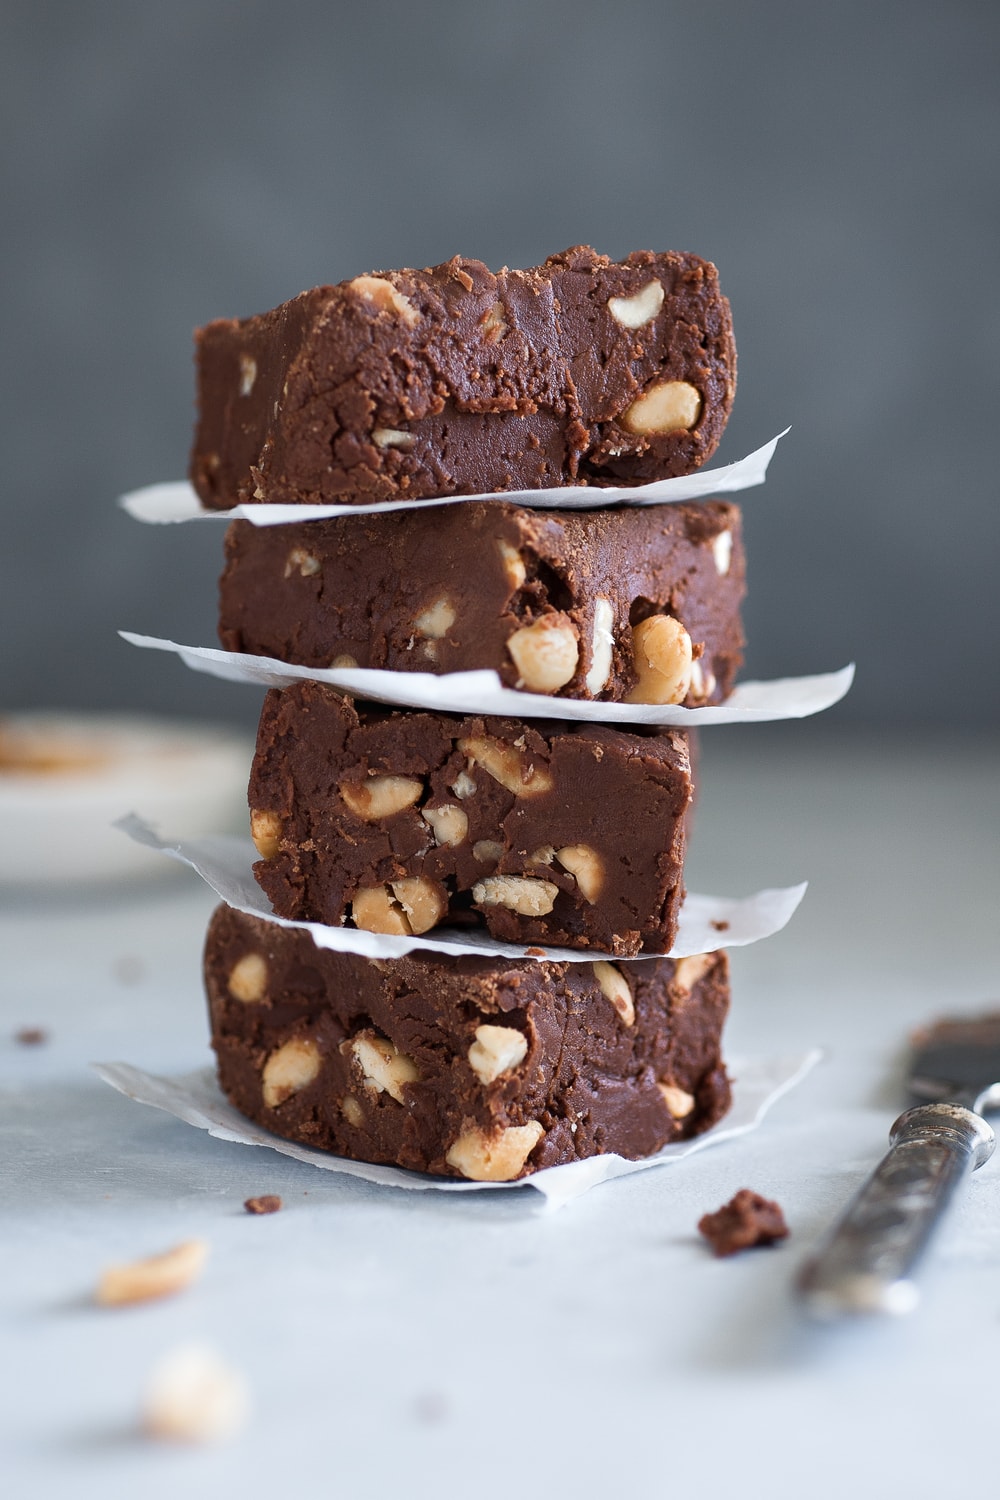 Stack of Fantasy Fudge Slices Filled With Nuts